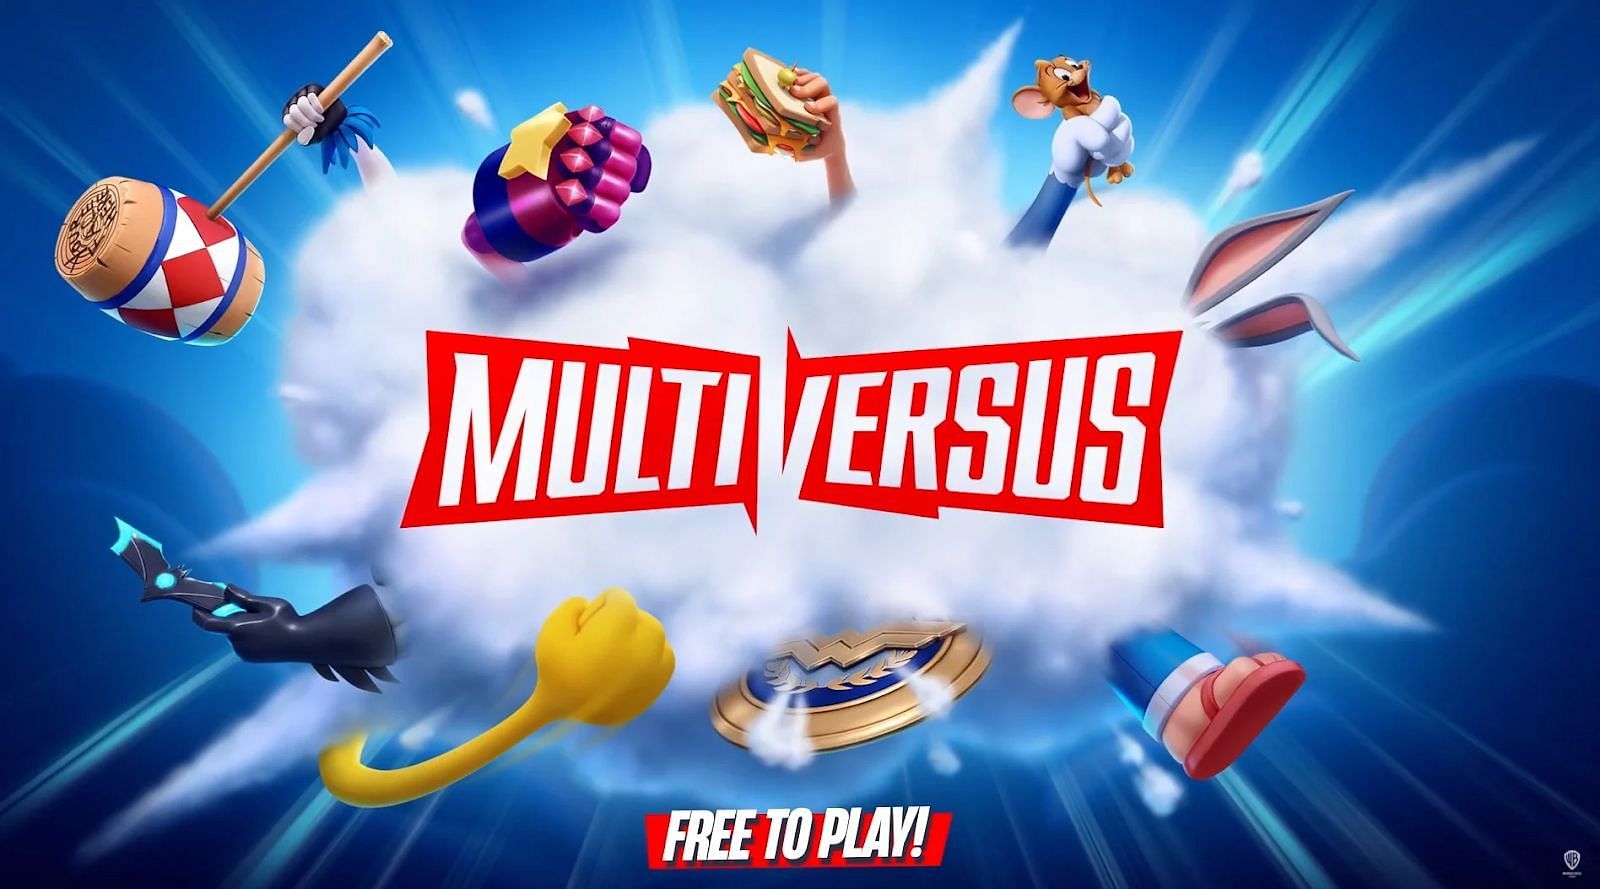 Multiversus (Image by WB Games)